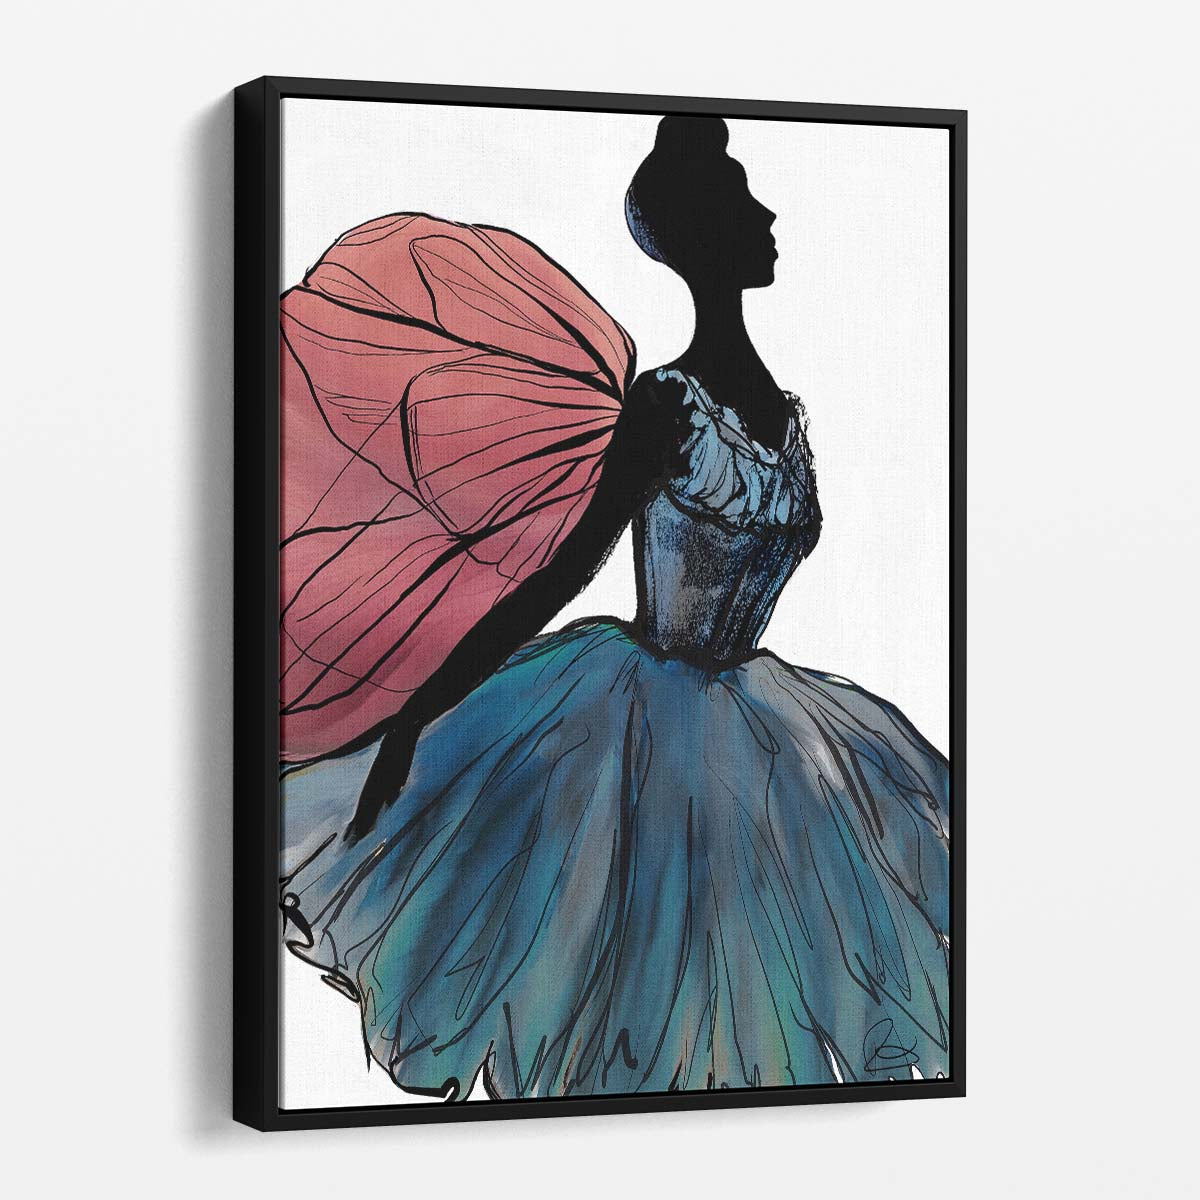 Bright, Illustration of Winged Ballerina Dancer by Ruth Day by Luxuriance Designs, made in USA